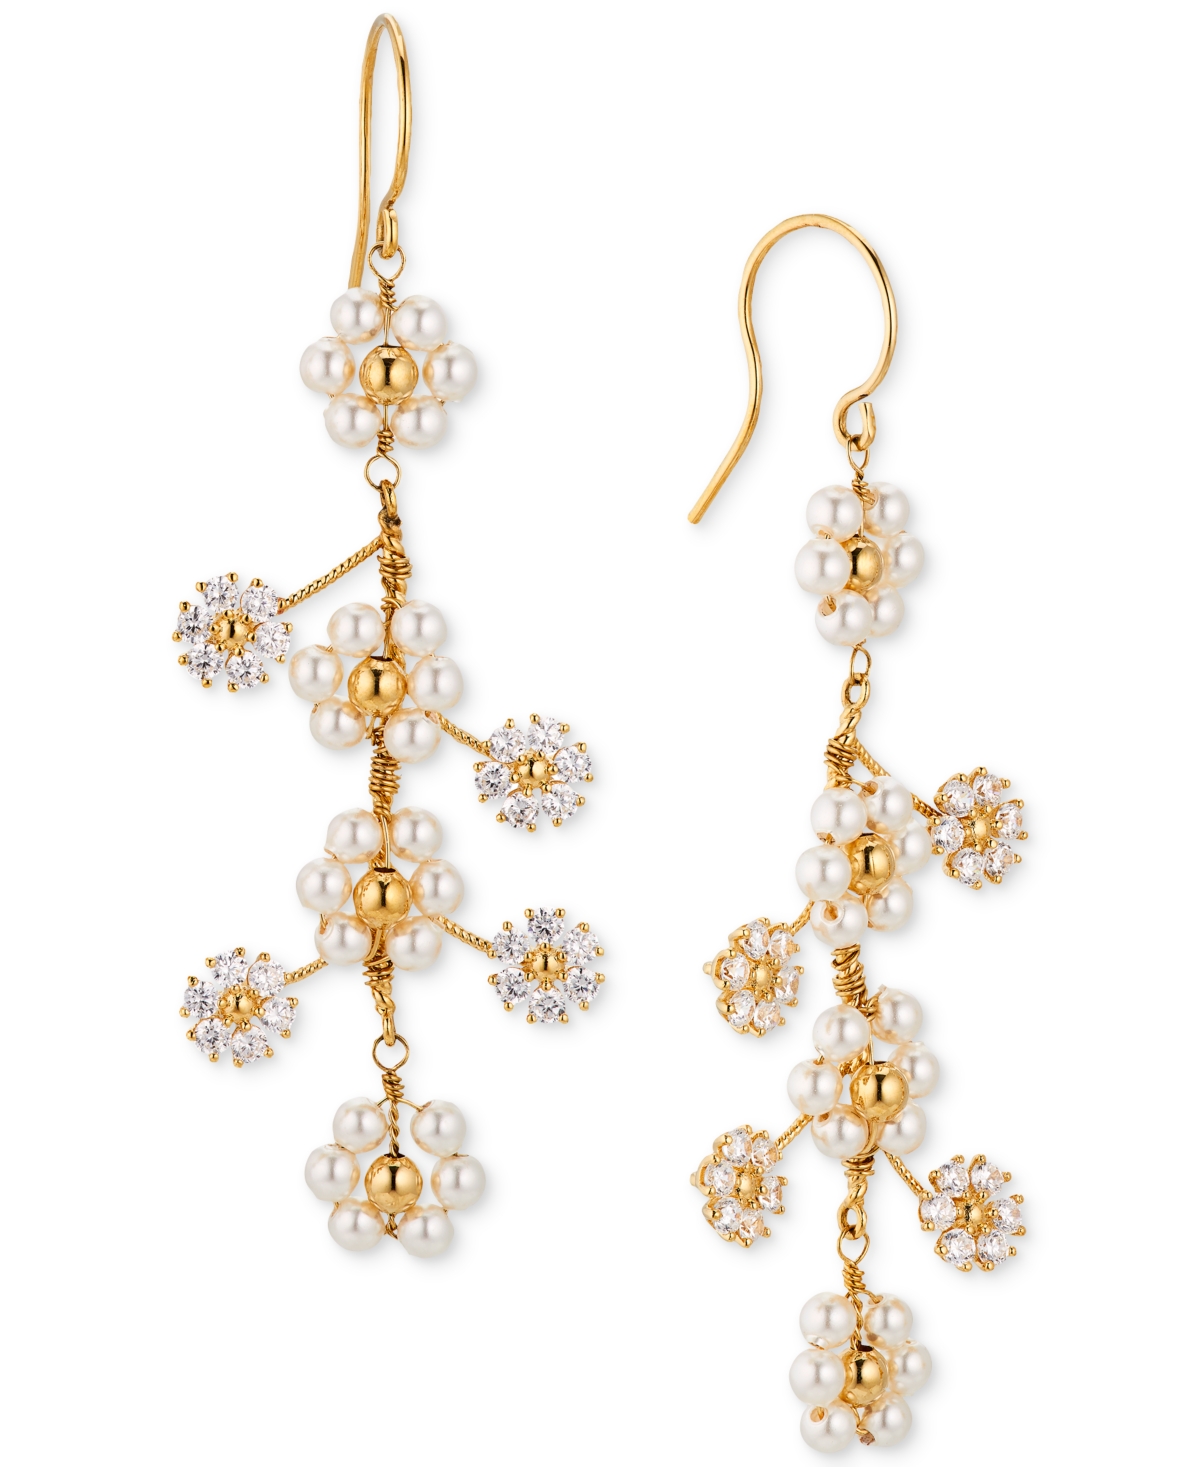 by Nadri 18k Gold-Plated Cubic Zirconia & Imitation Pearl Flower Statement Earrings - Gold